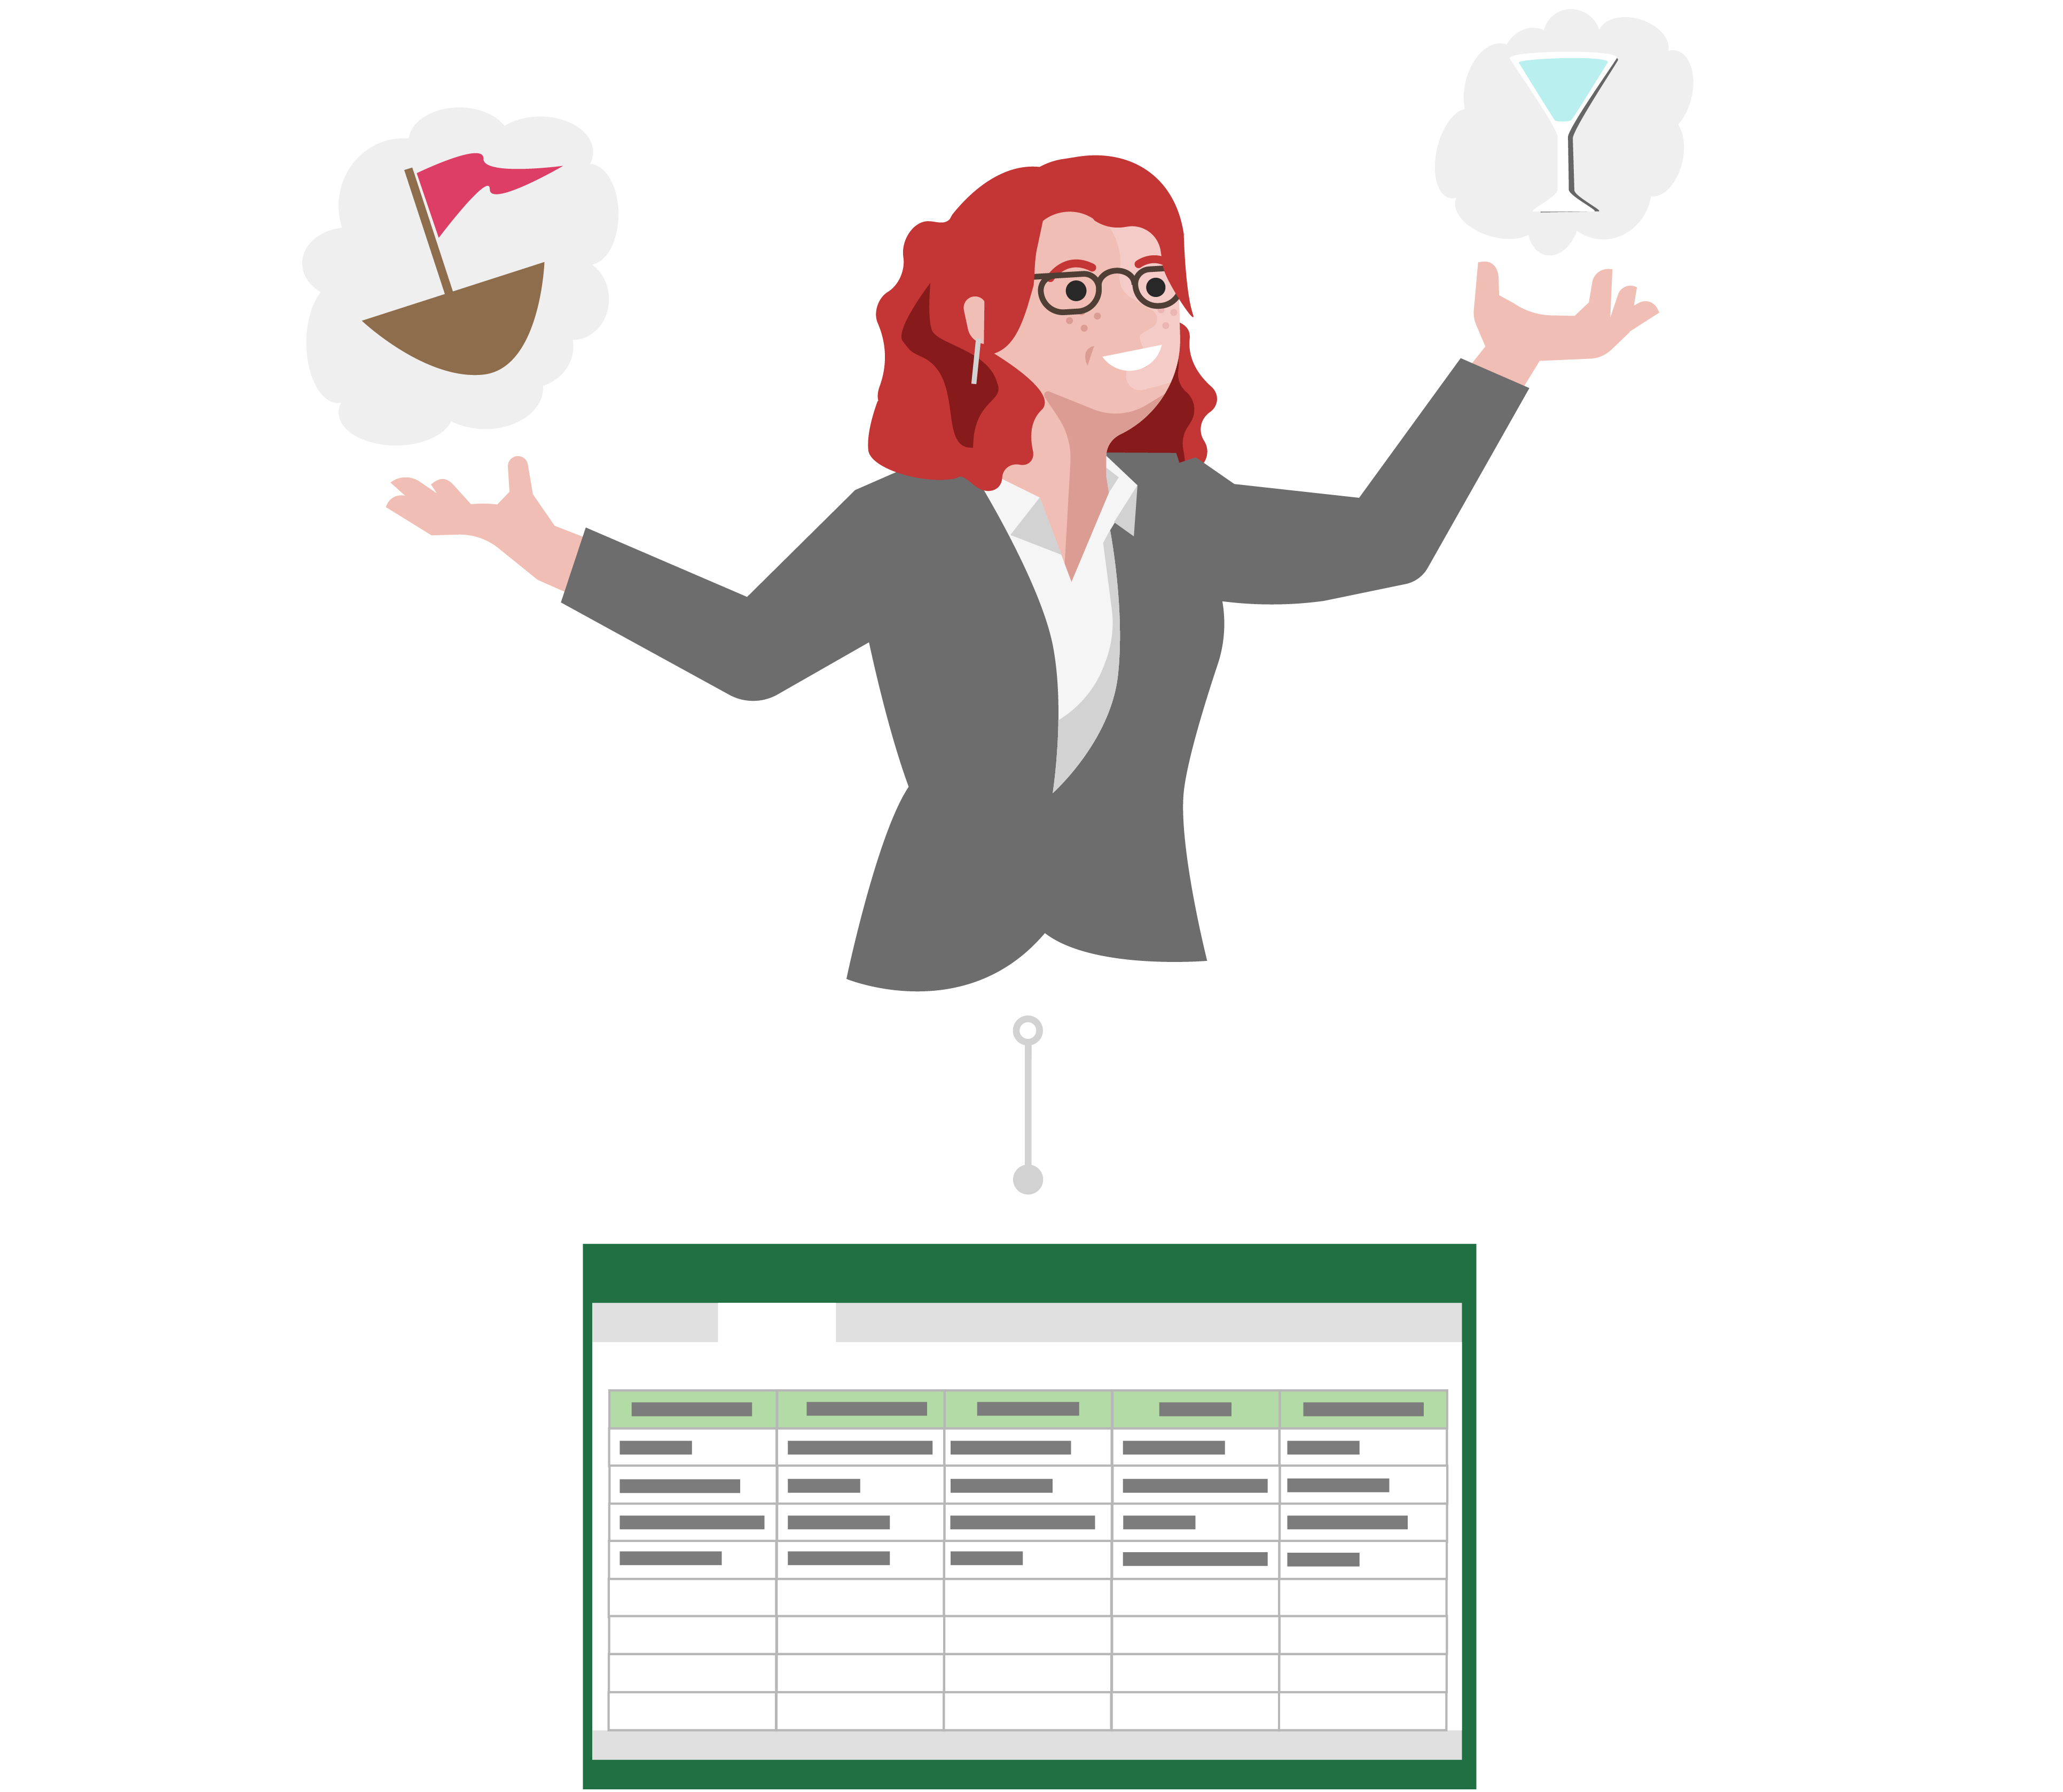 Linda needs feedback on her ideas, so she creates a spreadsheet and saves to the cloud.